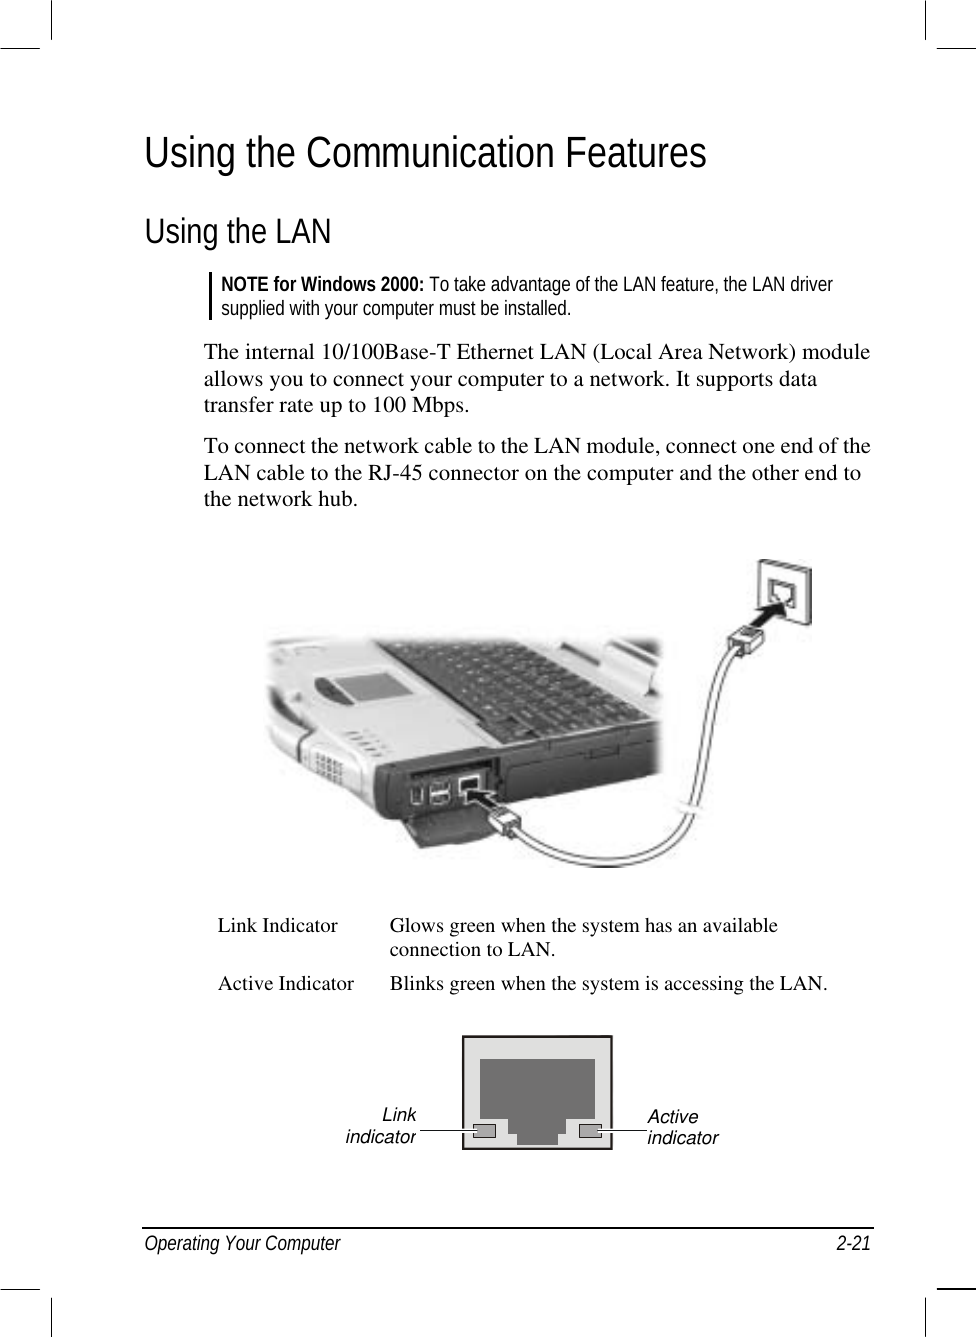  Operating Your Computer  2-21 Using the Communication Features Using the LAN NOTE for Windows 2000: To take advantage of the LAN feature, the LAN driver supplied with your computer must be installed.  The internal 10/100Base-T Ethernet LAN (Local Area Network) module allows you to connect your computer to a network. It supports data transfer rate up to 100 Mbps. To connect the network cable to the LAN module, connect one end of the LAN cable to the RJ-45 connector on the computer and the other end to the network hub.  Link Indicator  Glows green when the system has an available connection to LAN. Active Indicator  Blinks green when the system is accessing the LAN.  Active indicator Linkindicator